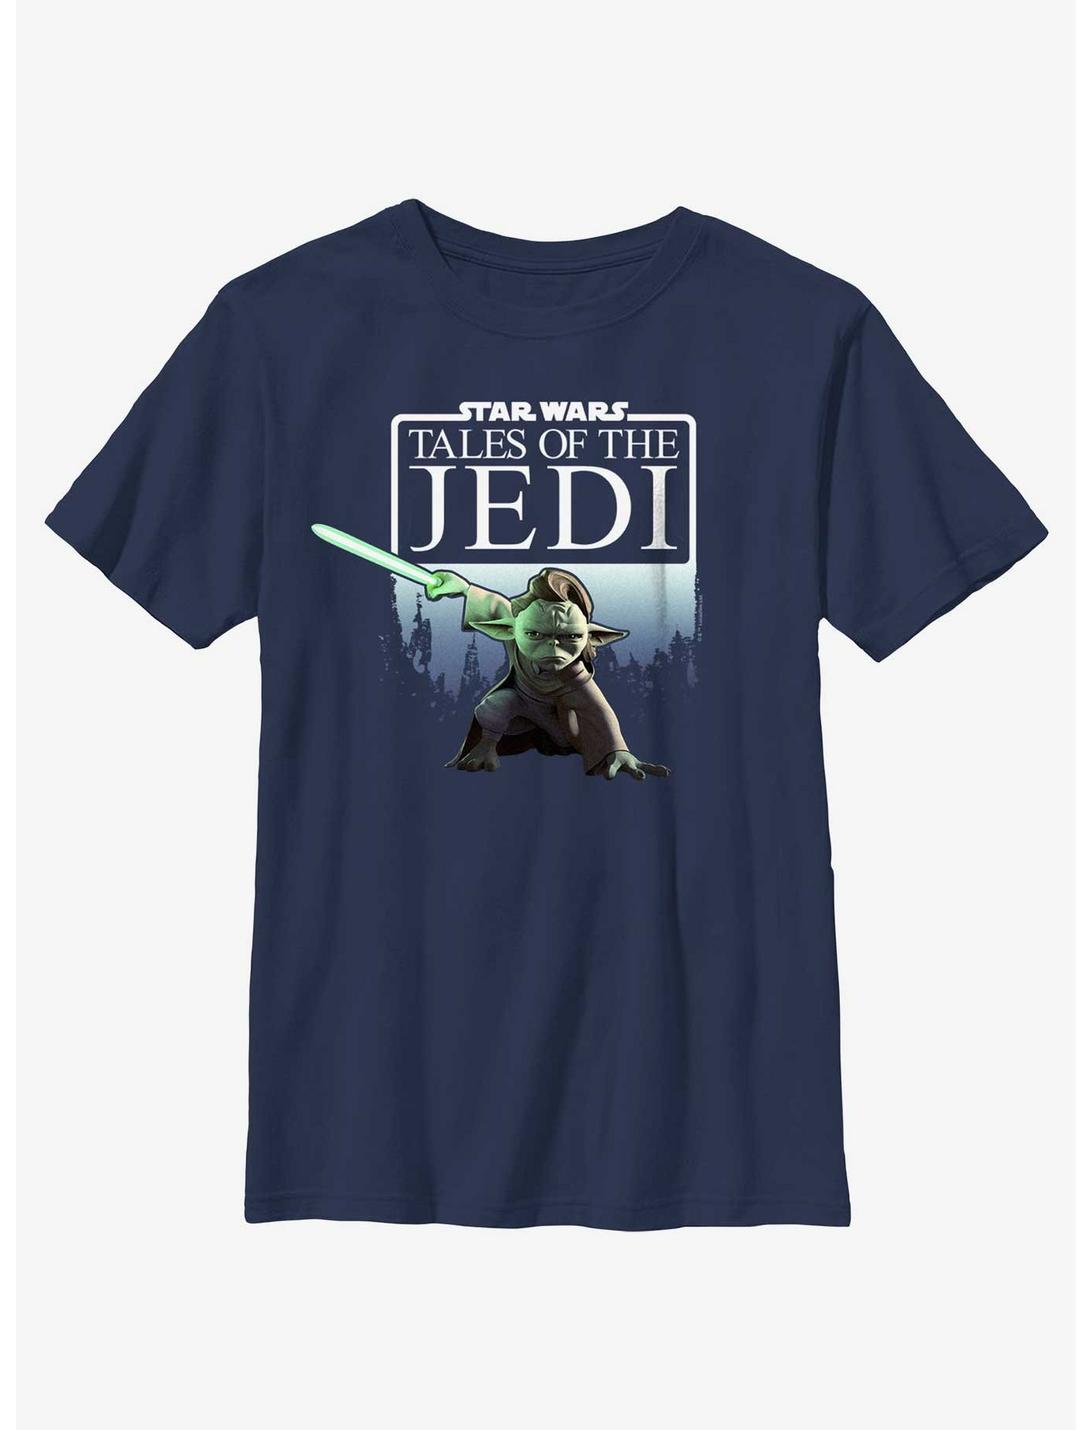 Star Wars: Tales of the Jedi Yaddle Youth T-Shirt, NAVY, hi-res